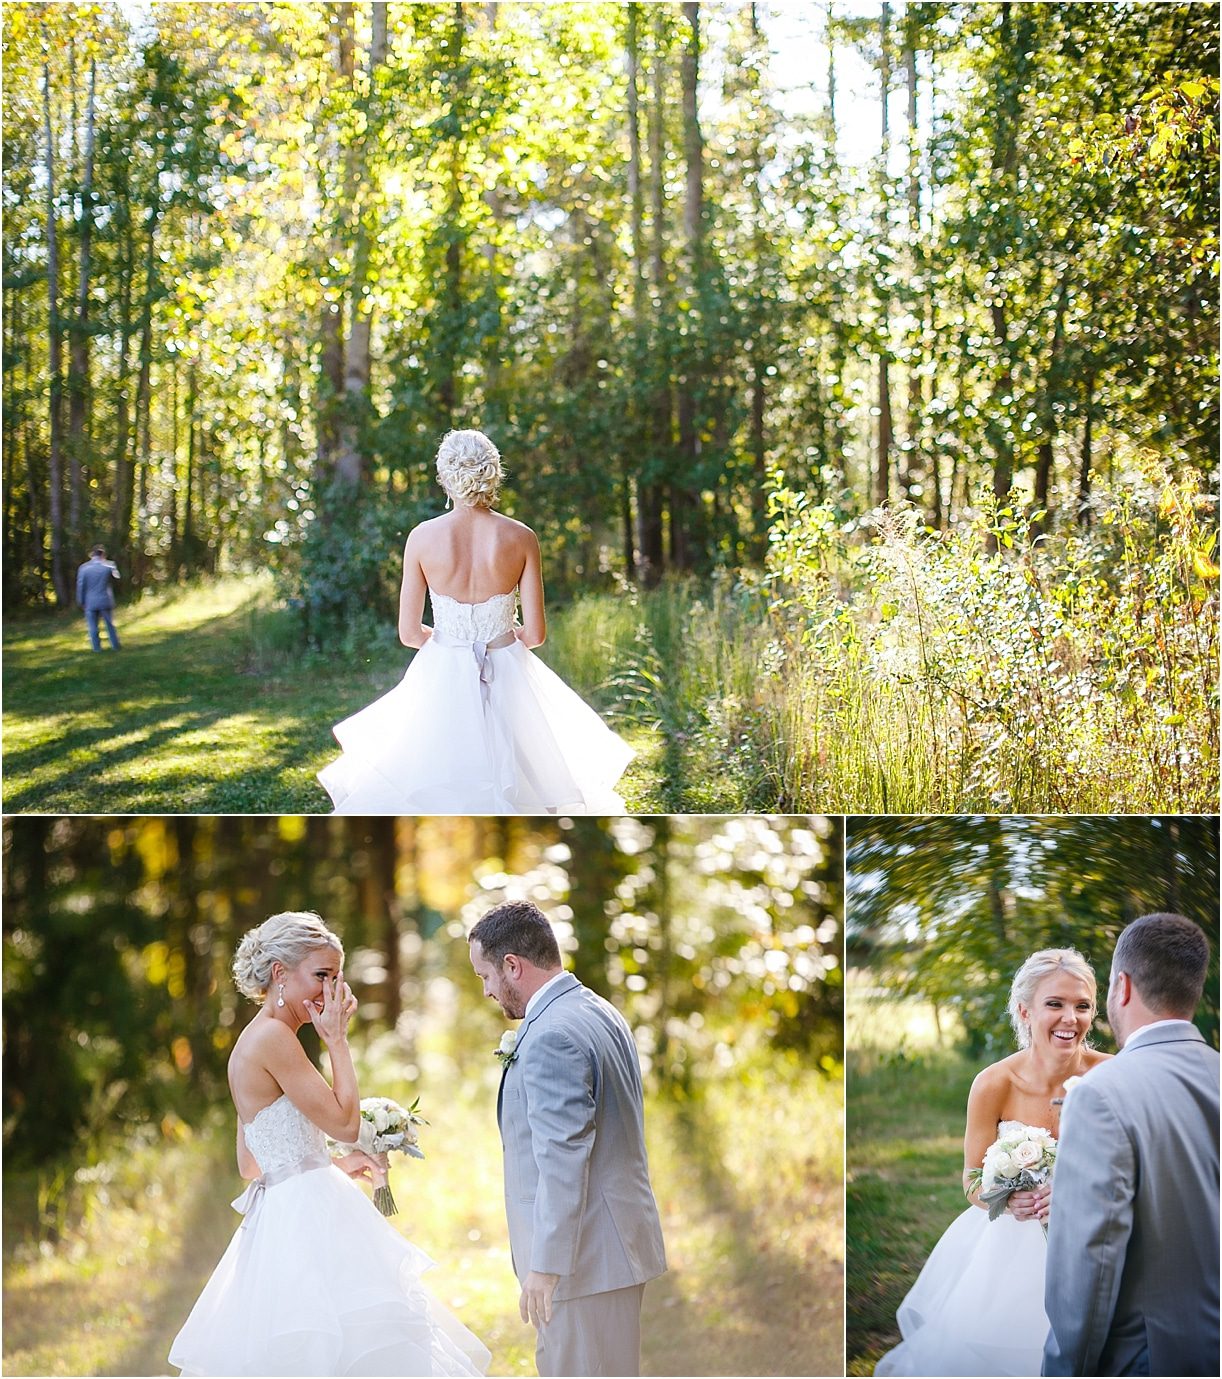 Virginia Winery Wedding at New Kent as seen on Hill City Bride Blog by Rebecca Keeling Studios - lavender, purple, outdoor, first look